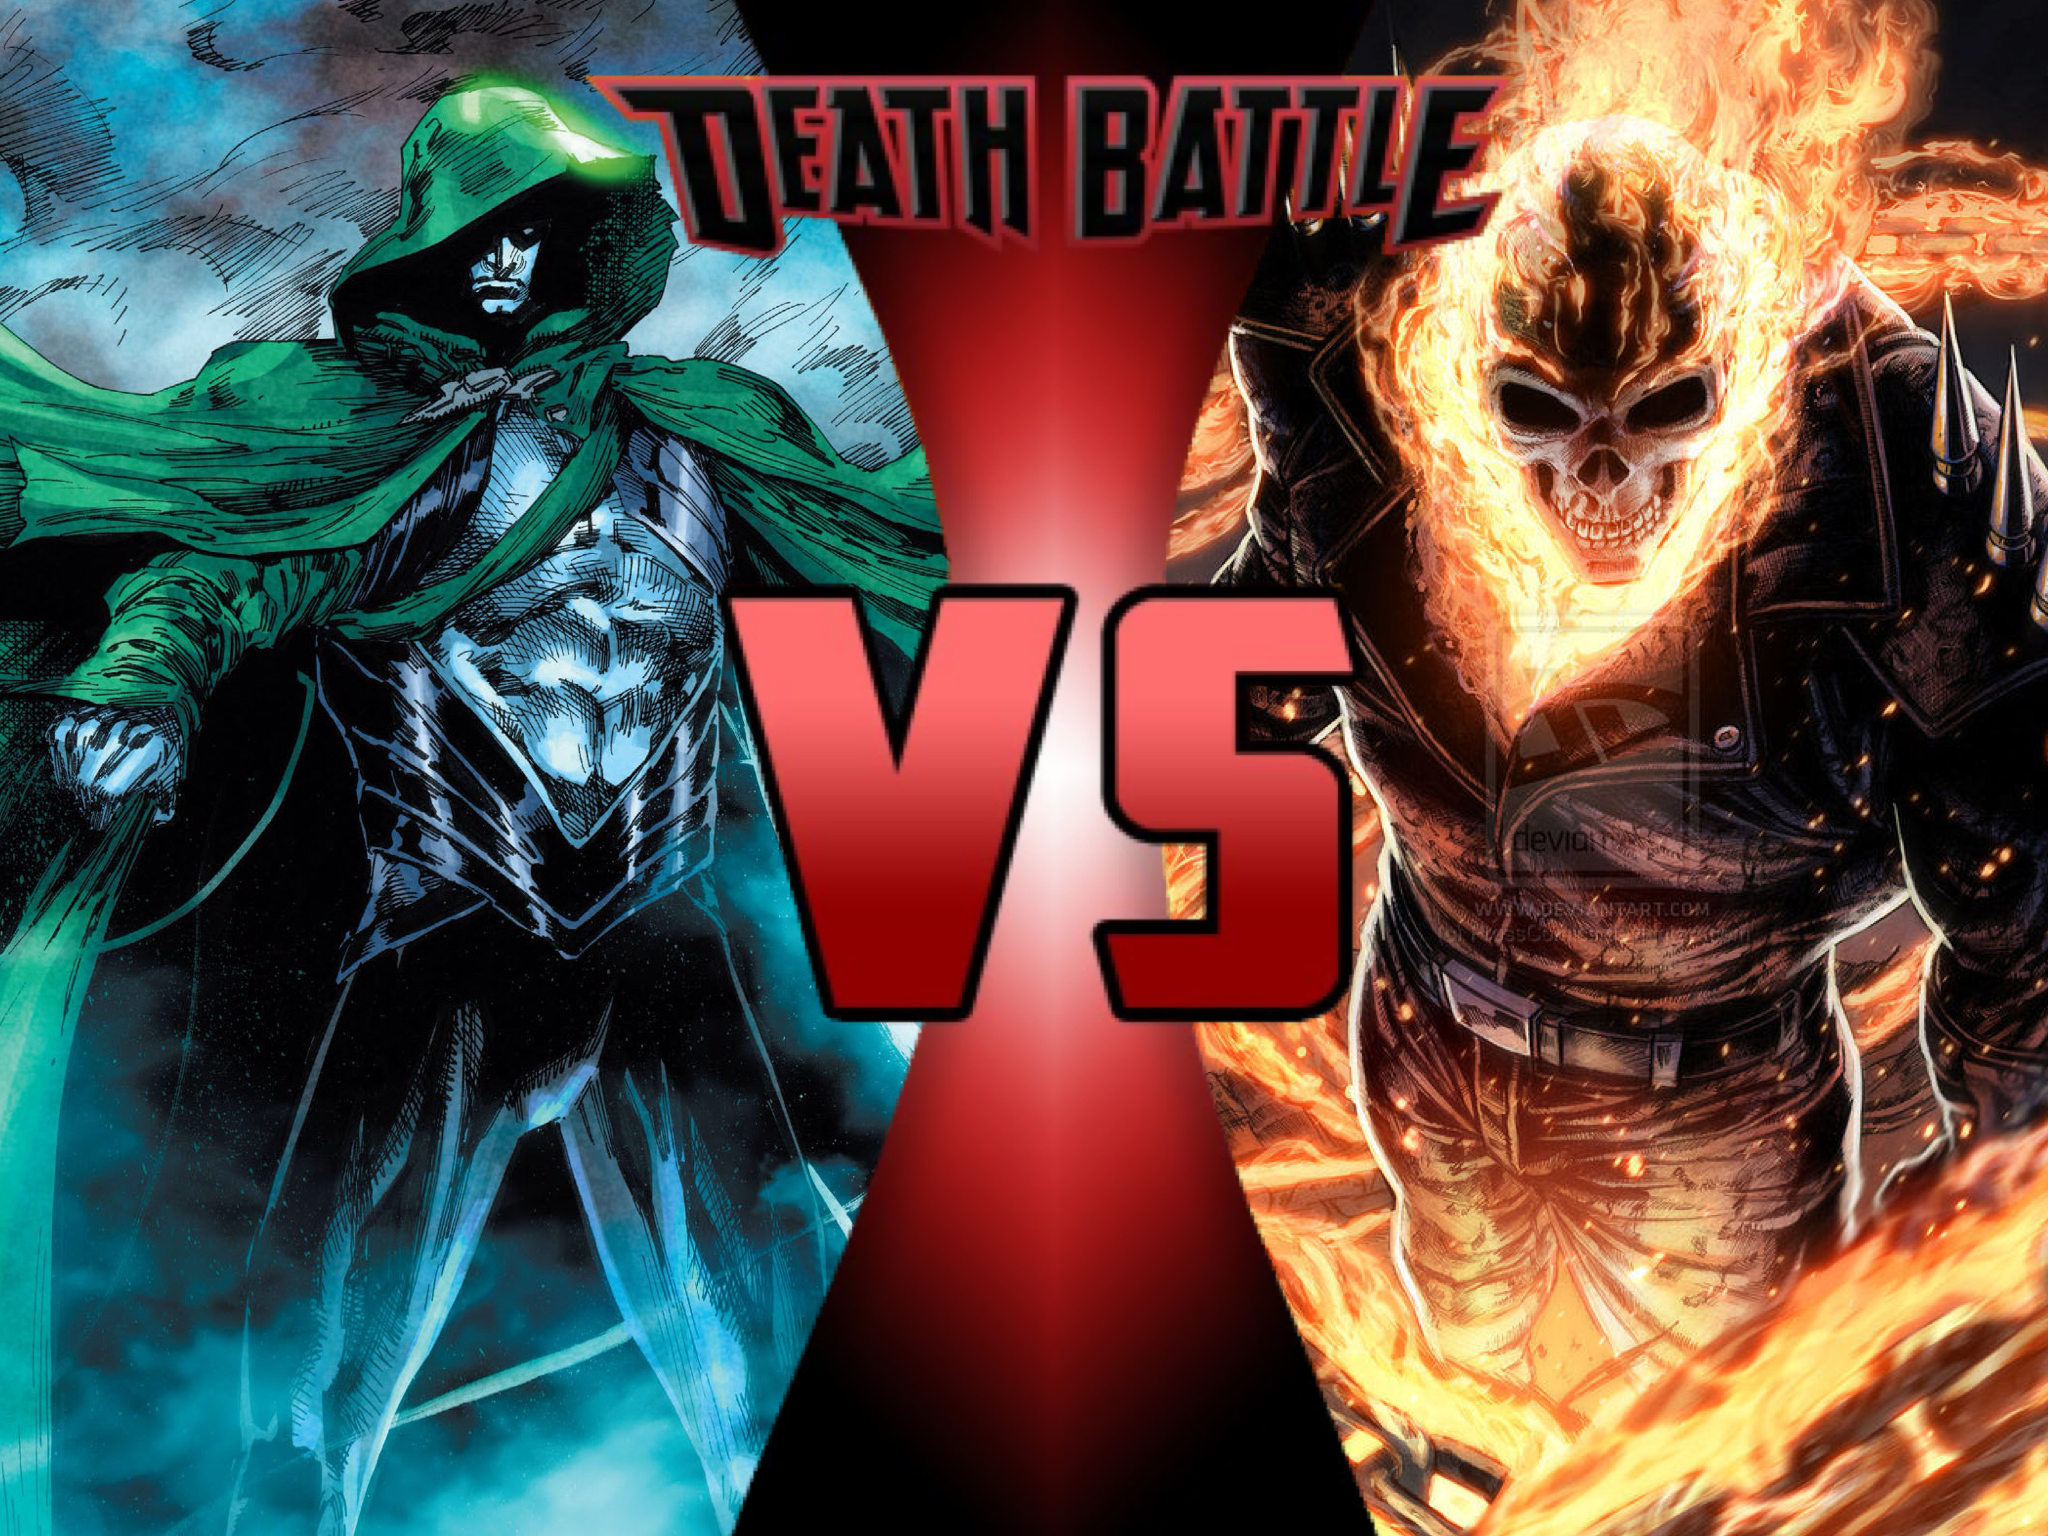 Is Ghost Rider or his spirit powerful enough to defeat The Spectre